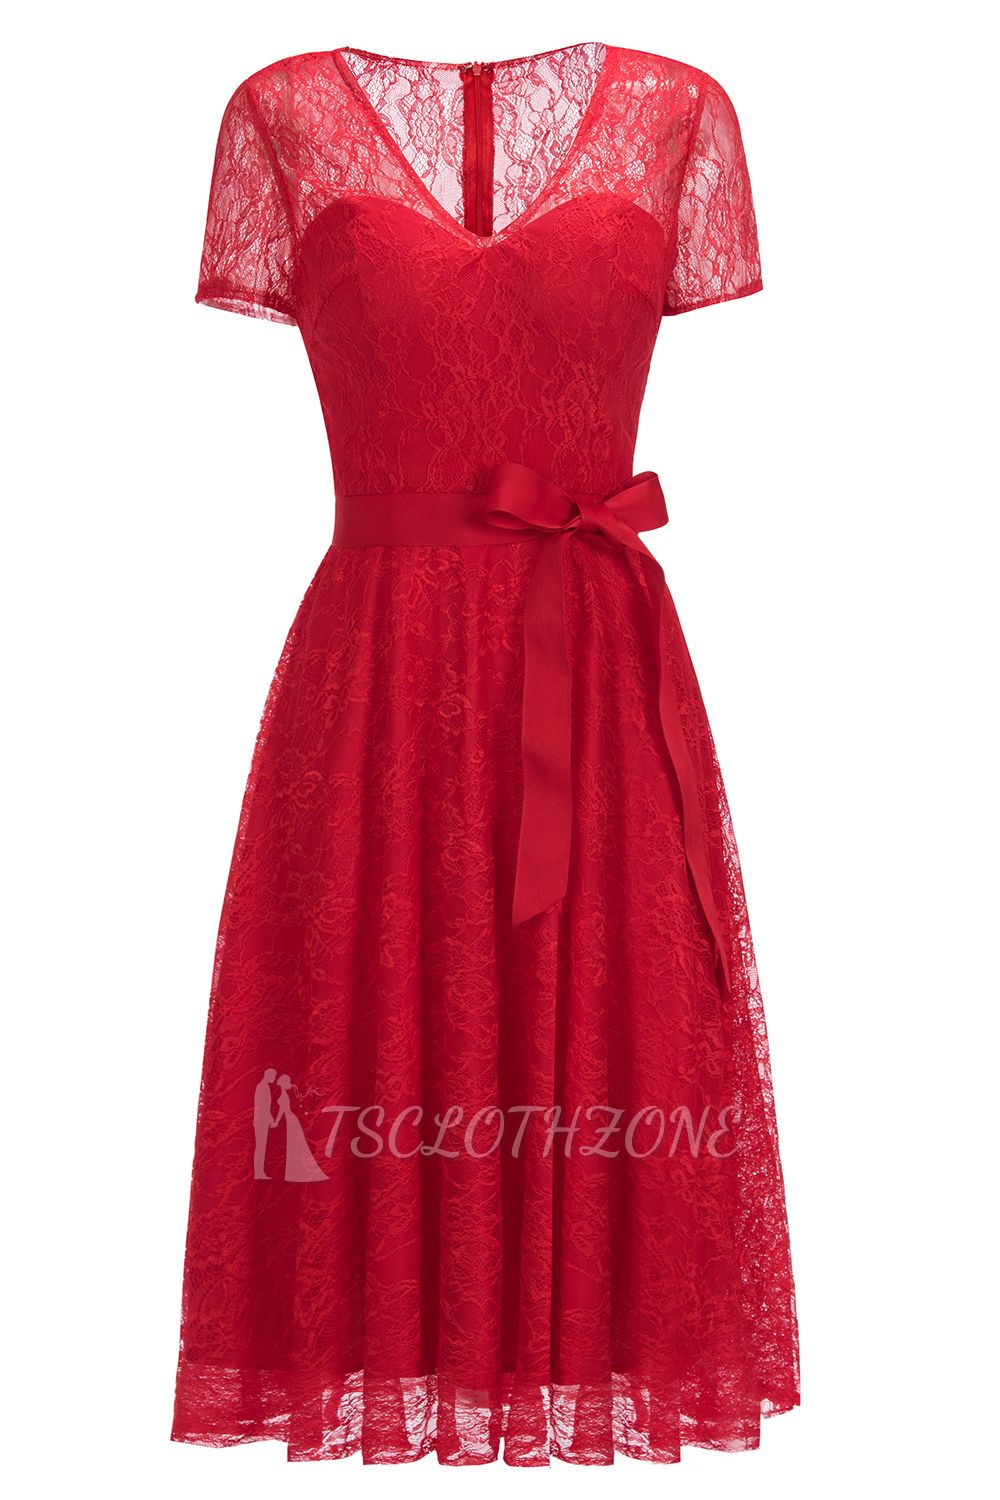 V-neck Short Sleeves Lace Dresses with Bow Sash